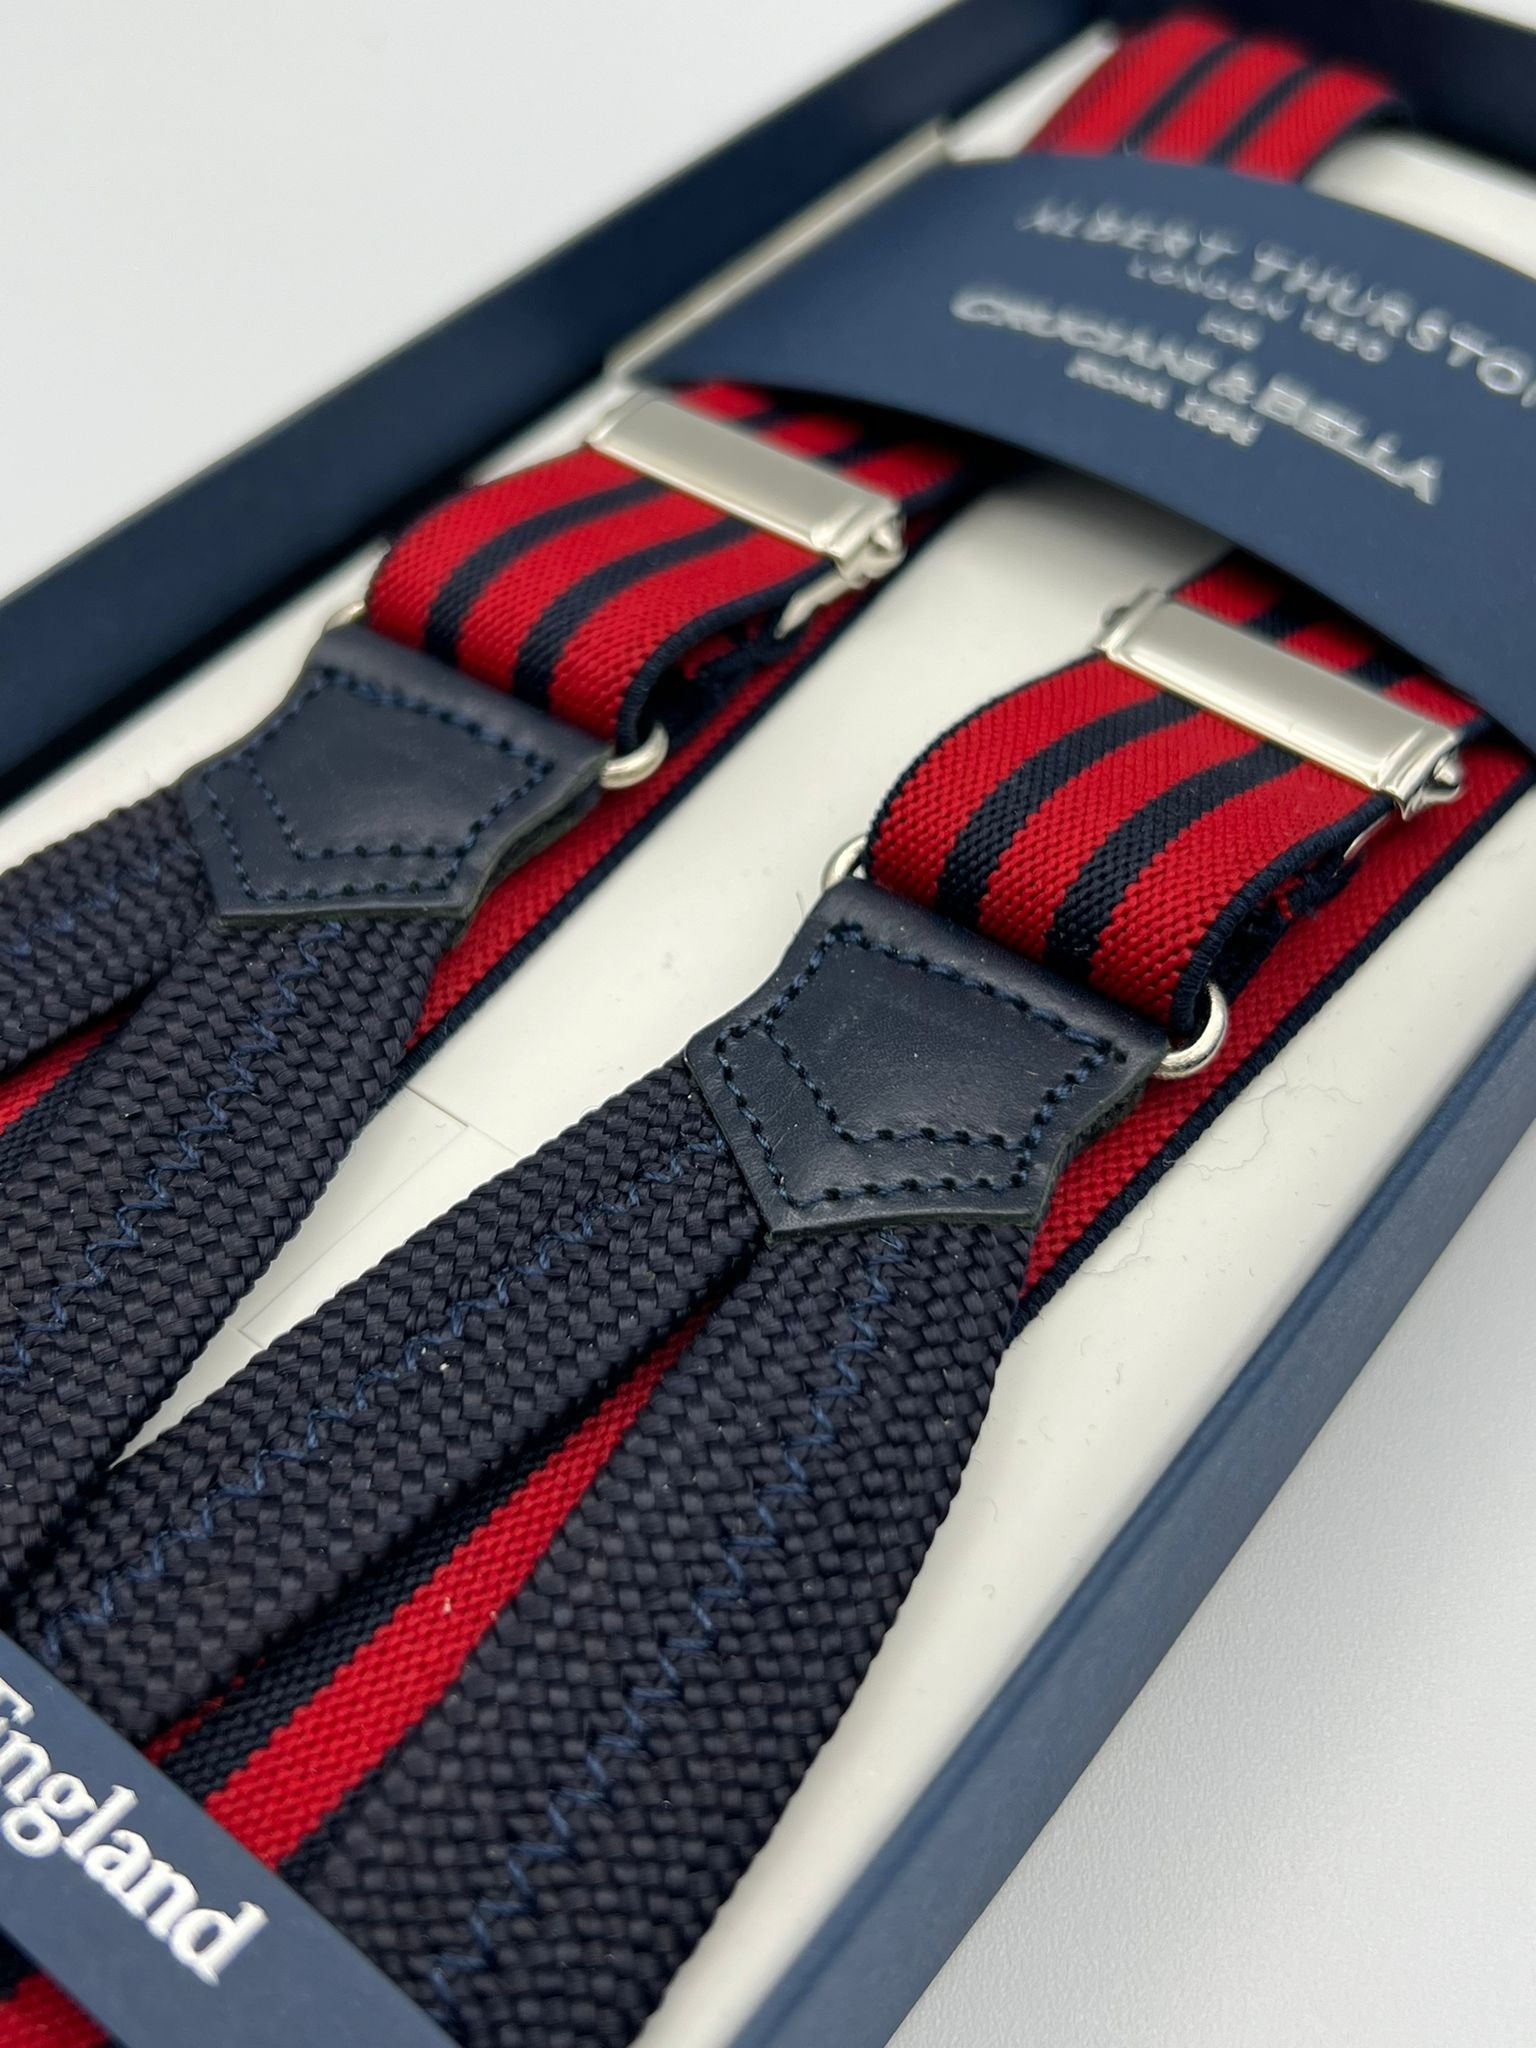 Albert Thurston for Cruciani & Bella Made in England Adjustable Sizing 25 mm elastic braces  Red and Blue Stripes Braid ends Y-Shaped Nickel Fittings Size: XL #6751